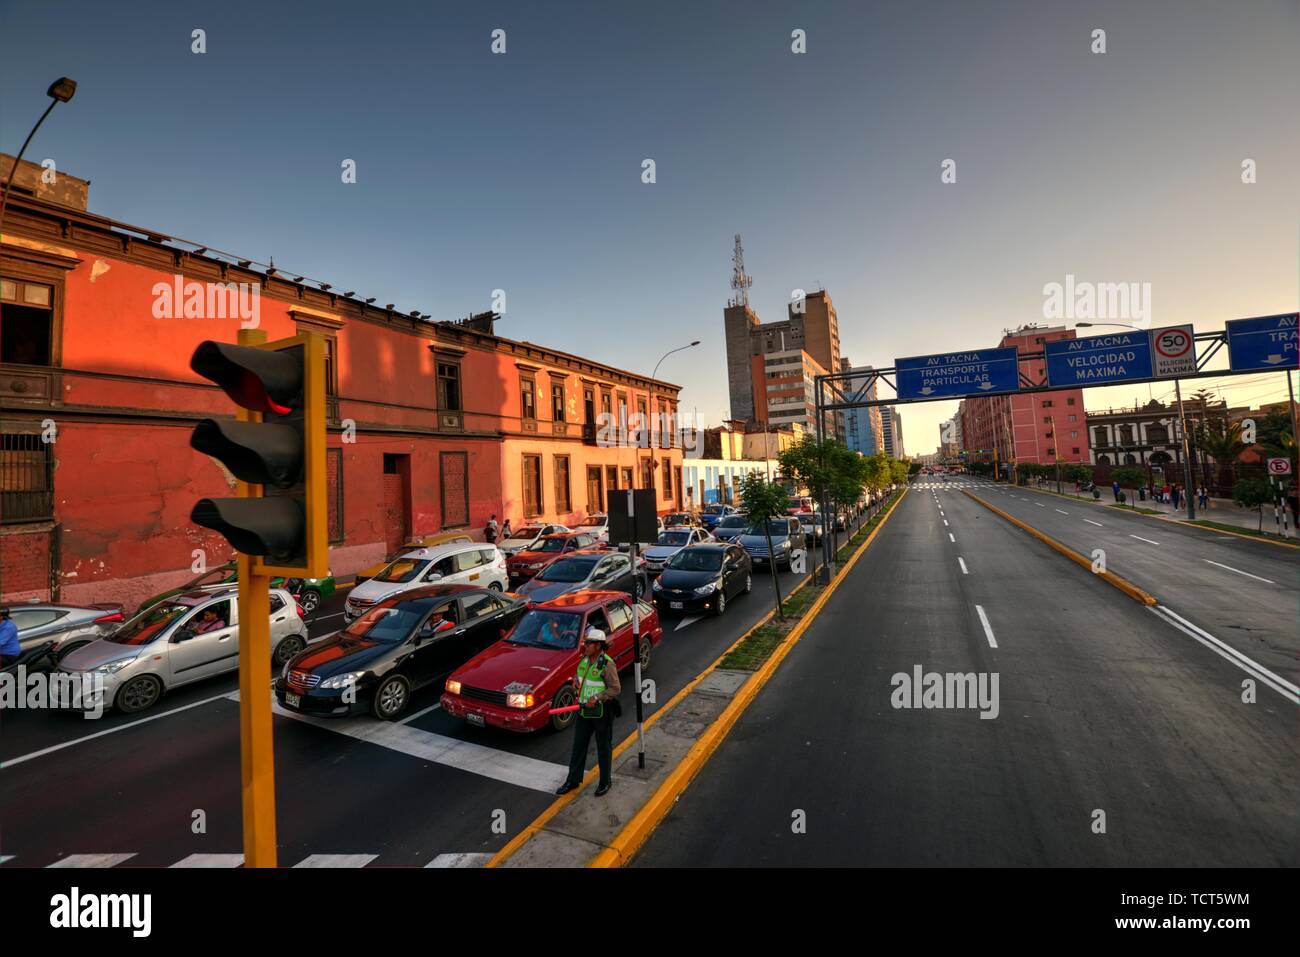 Lima, Peru - April 21, 2018: Early evening traffic lining up at red stop sign with traffic police officer Stock Photo